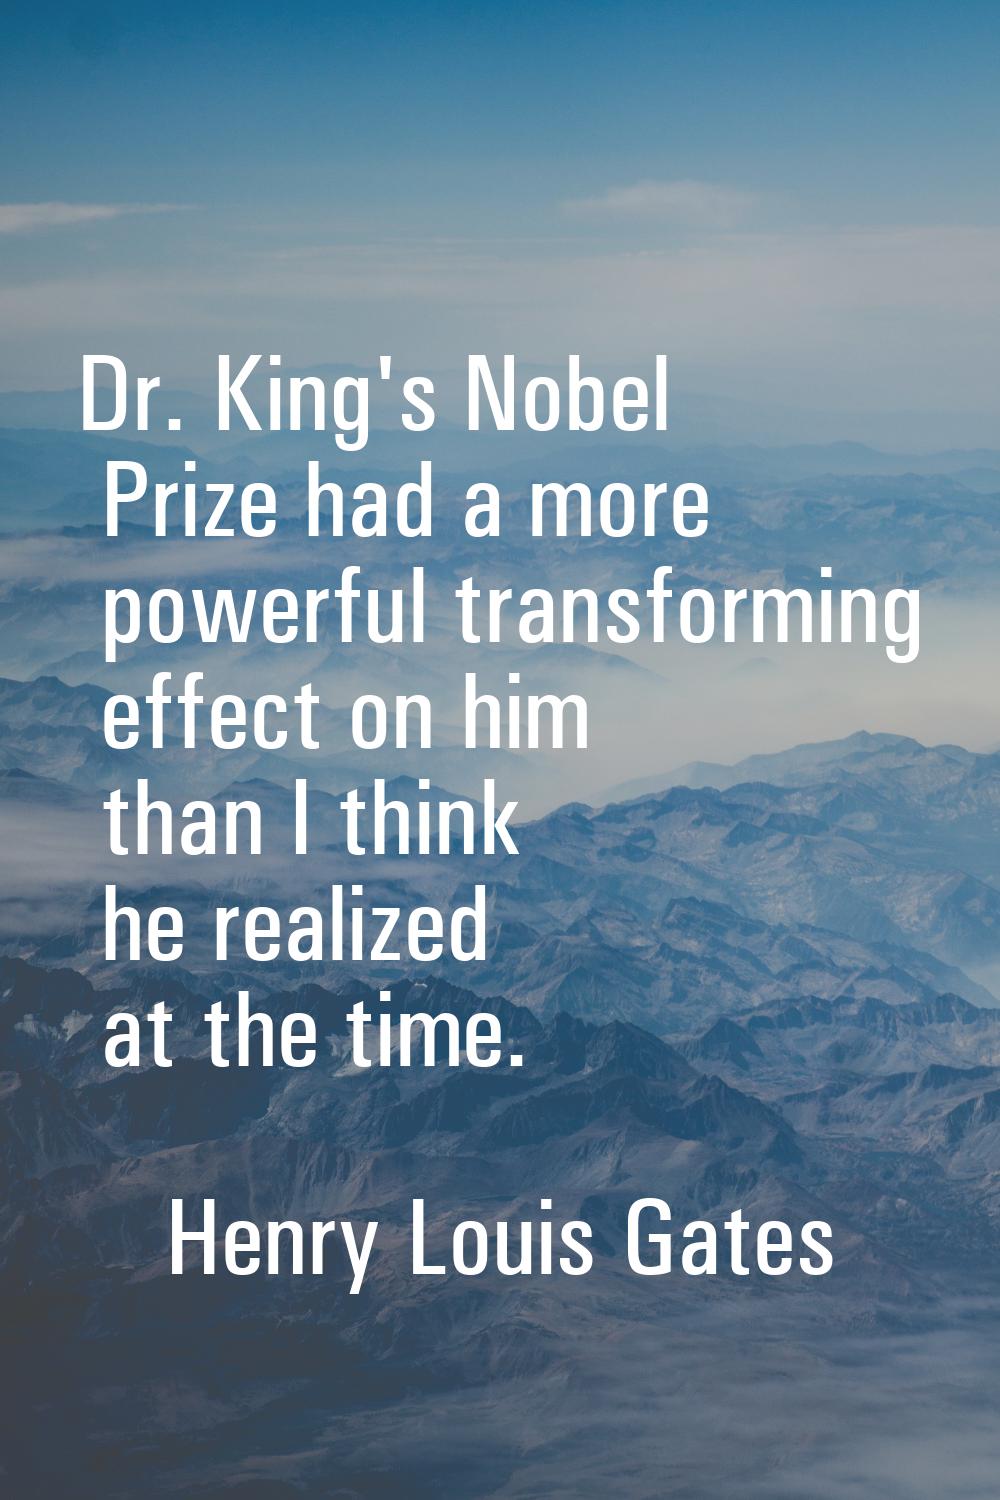 Dr. King's Nobel Prize had a more powerful transforming effect on him than I think he realized at t